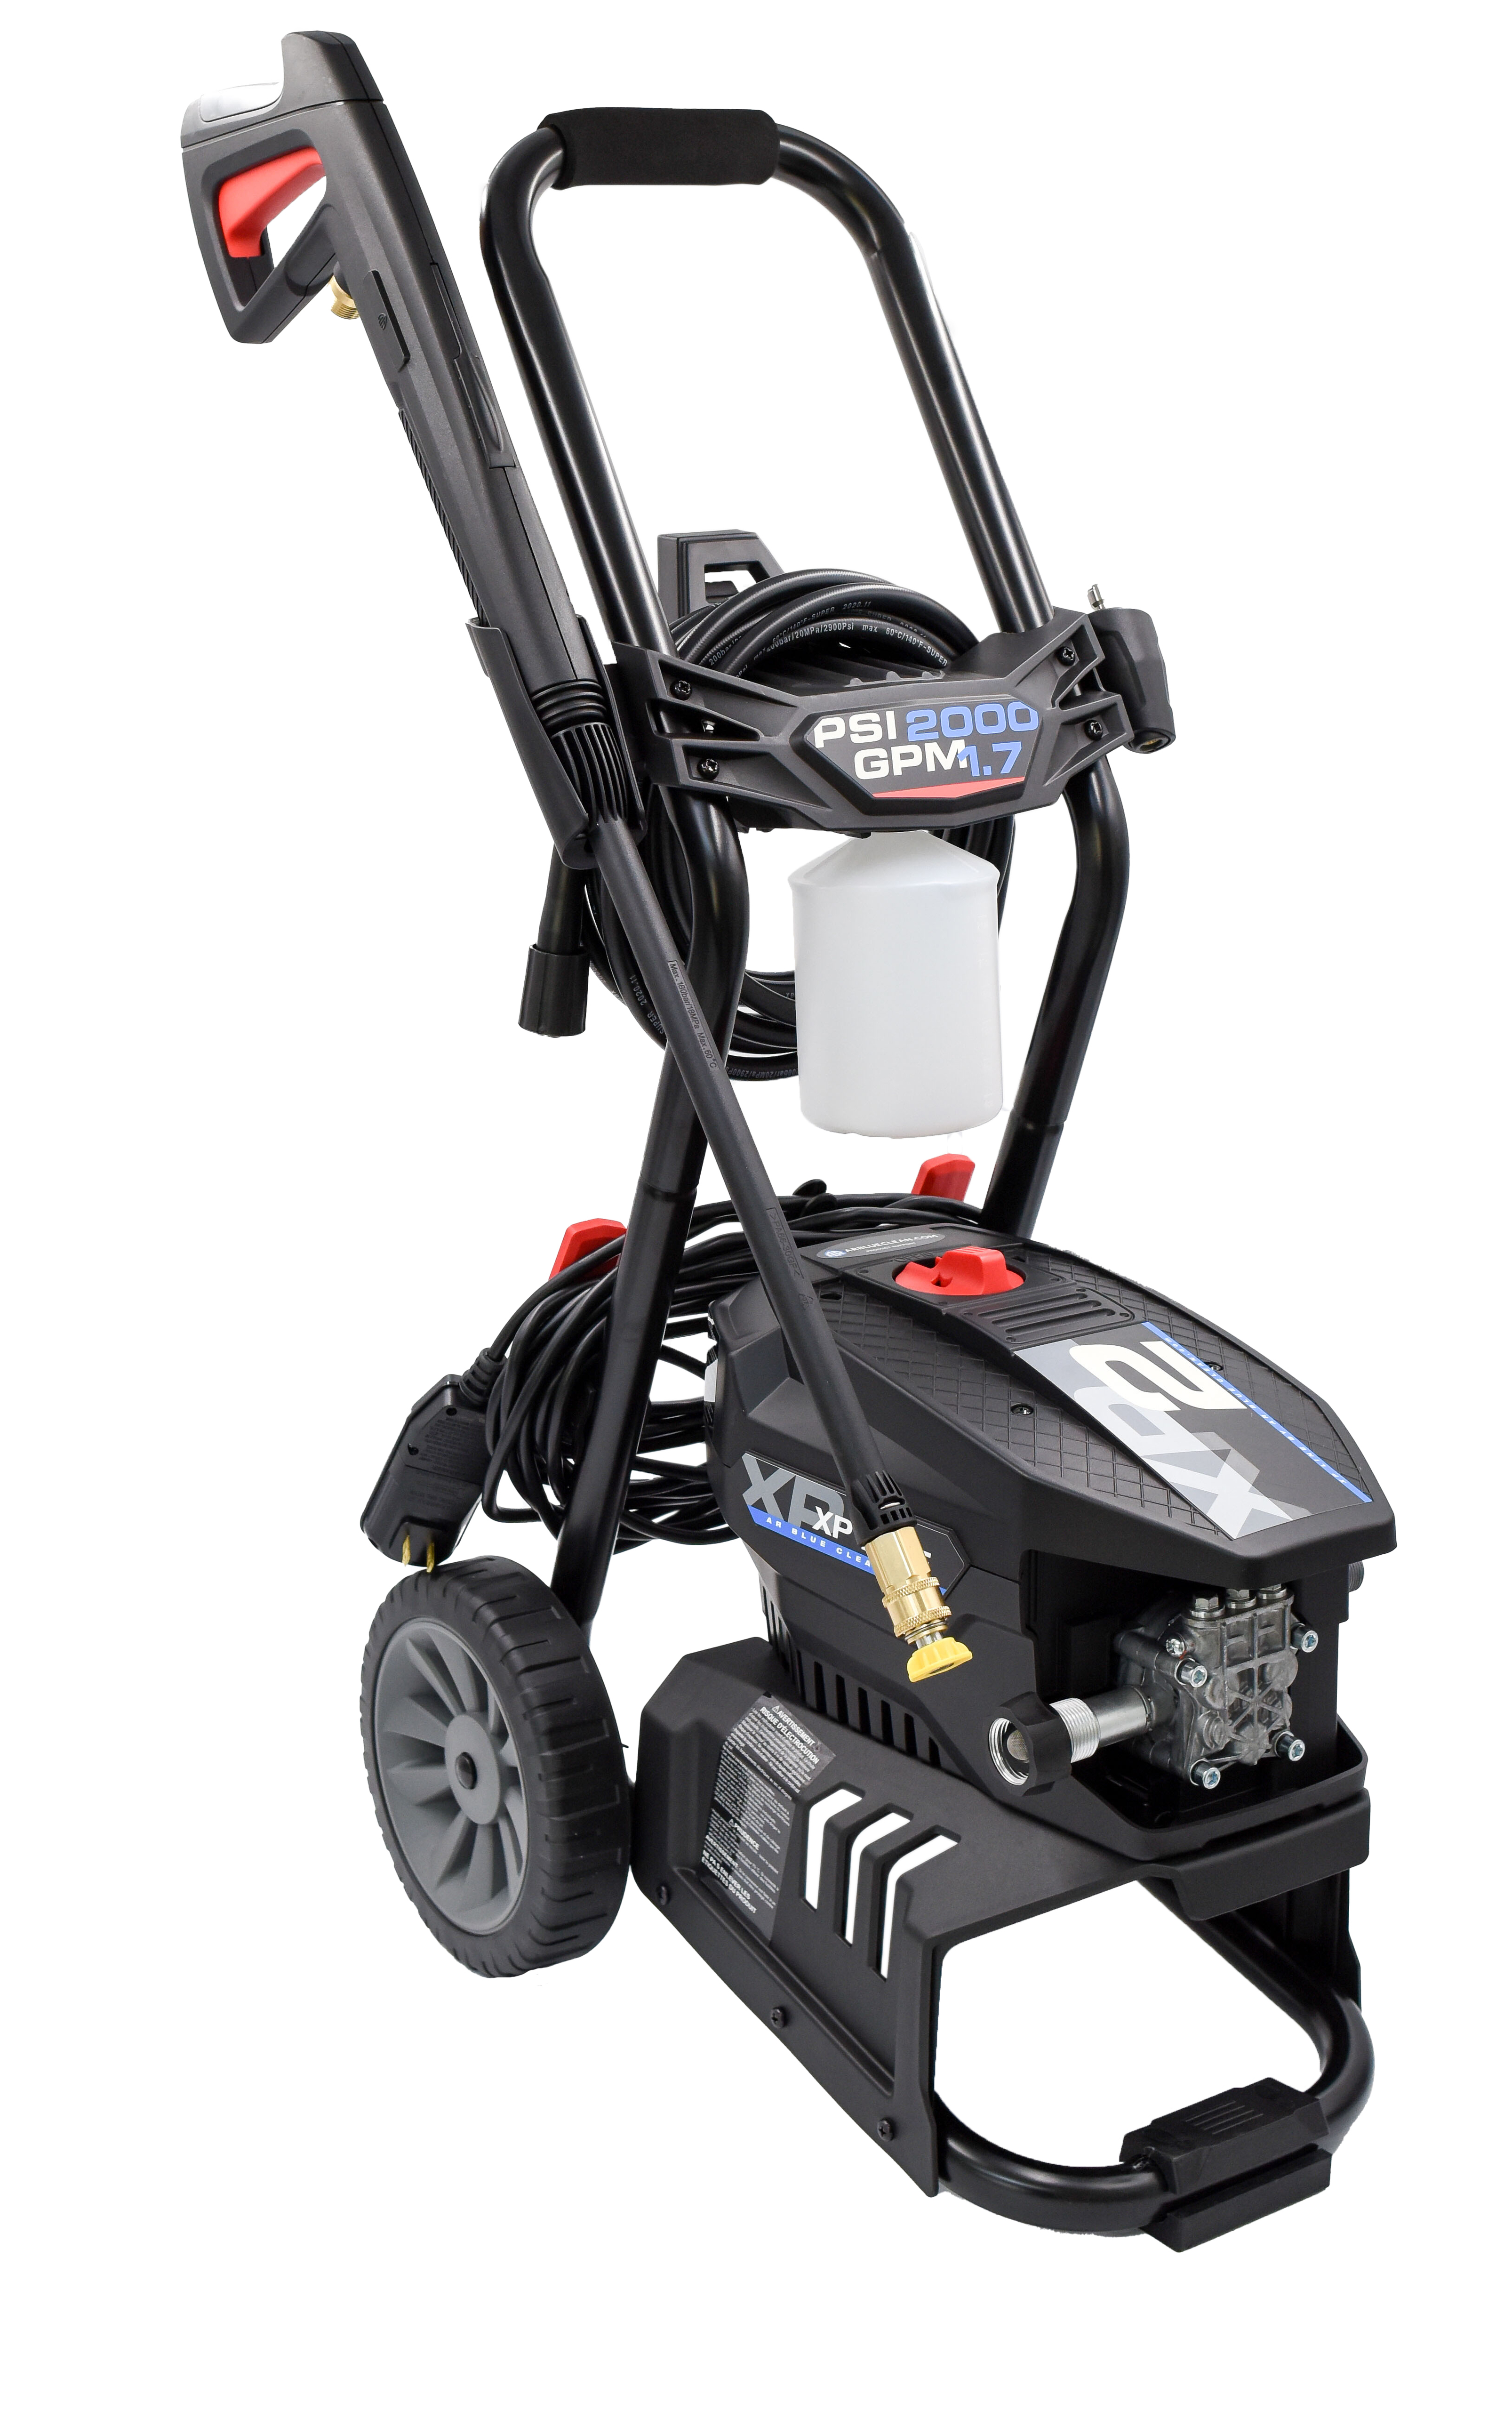 AR Blue Clean XP2 2000, 2000 PSI, 13 amp, Electric Pressure Washer Questions & Answers